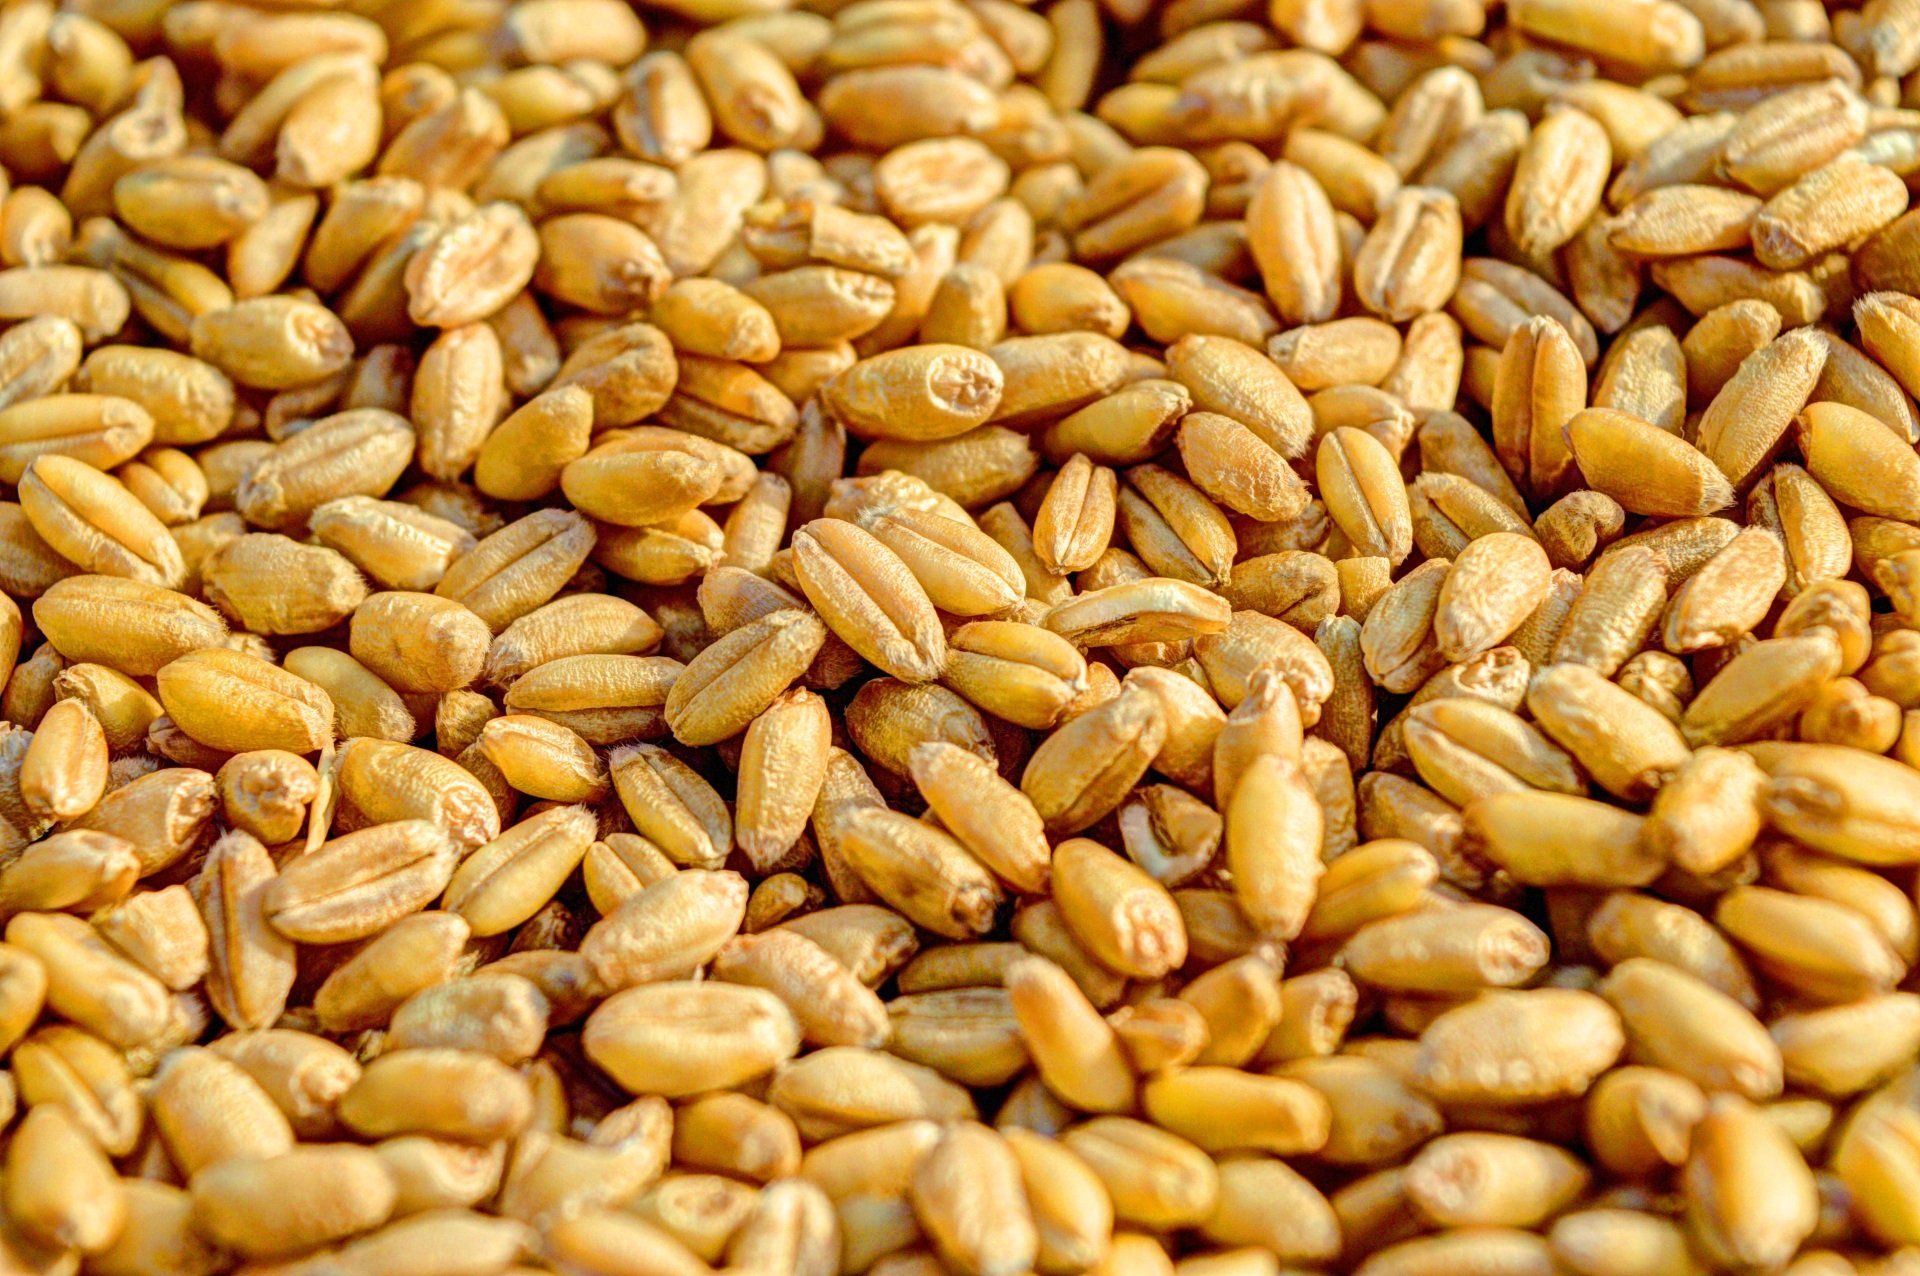 a close up of a pile of wheat grains .